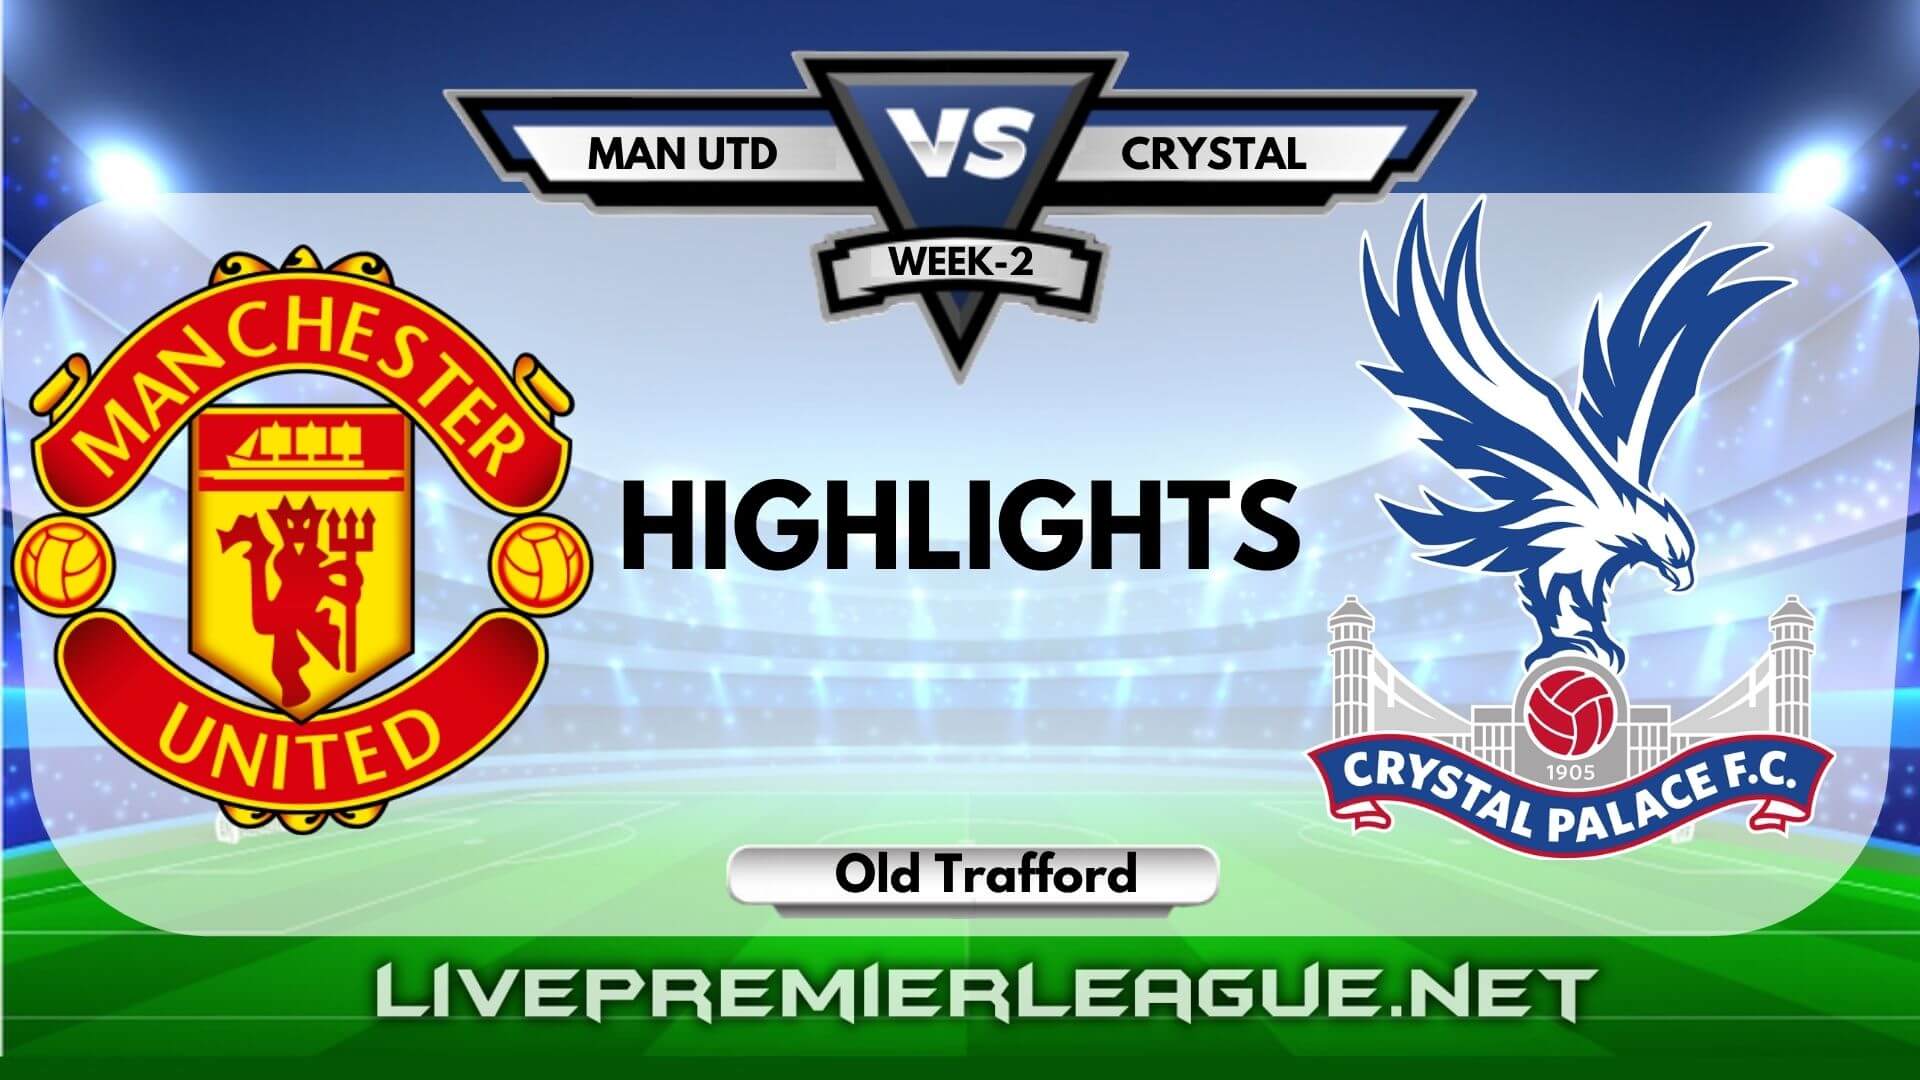 Manchester United Vs Crystal Palace Highlights 2020 EPL Week 2